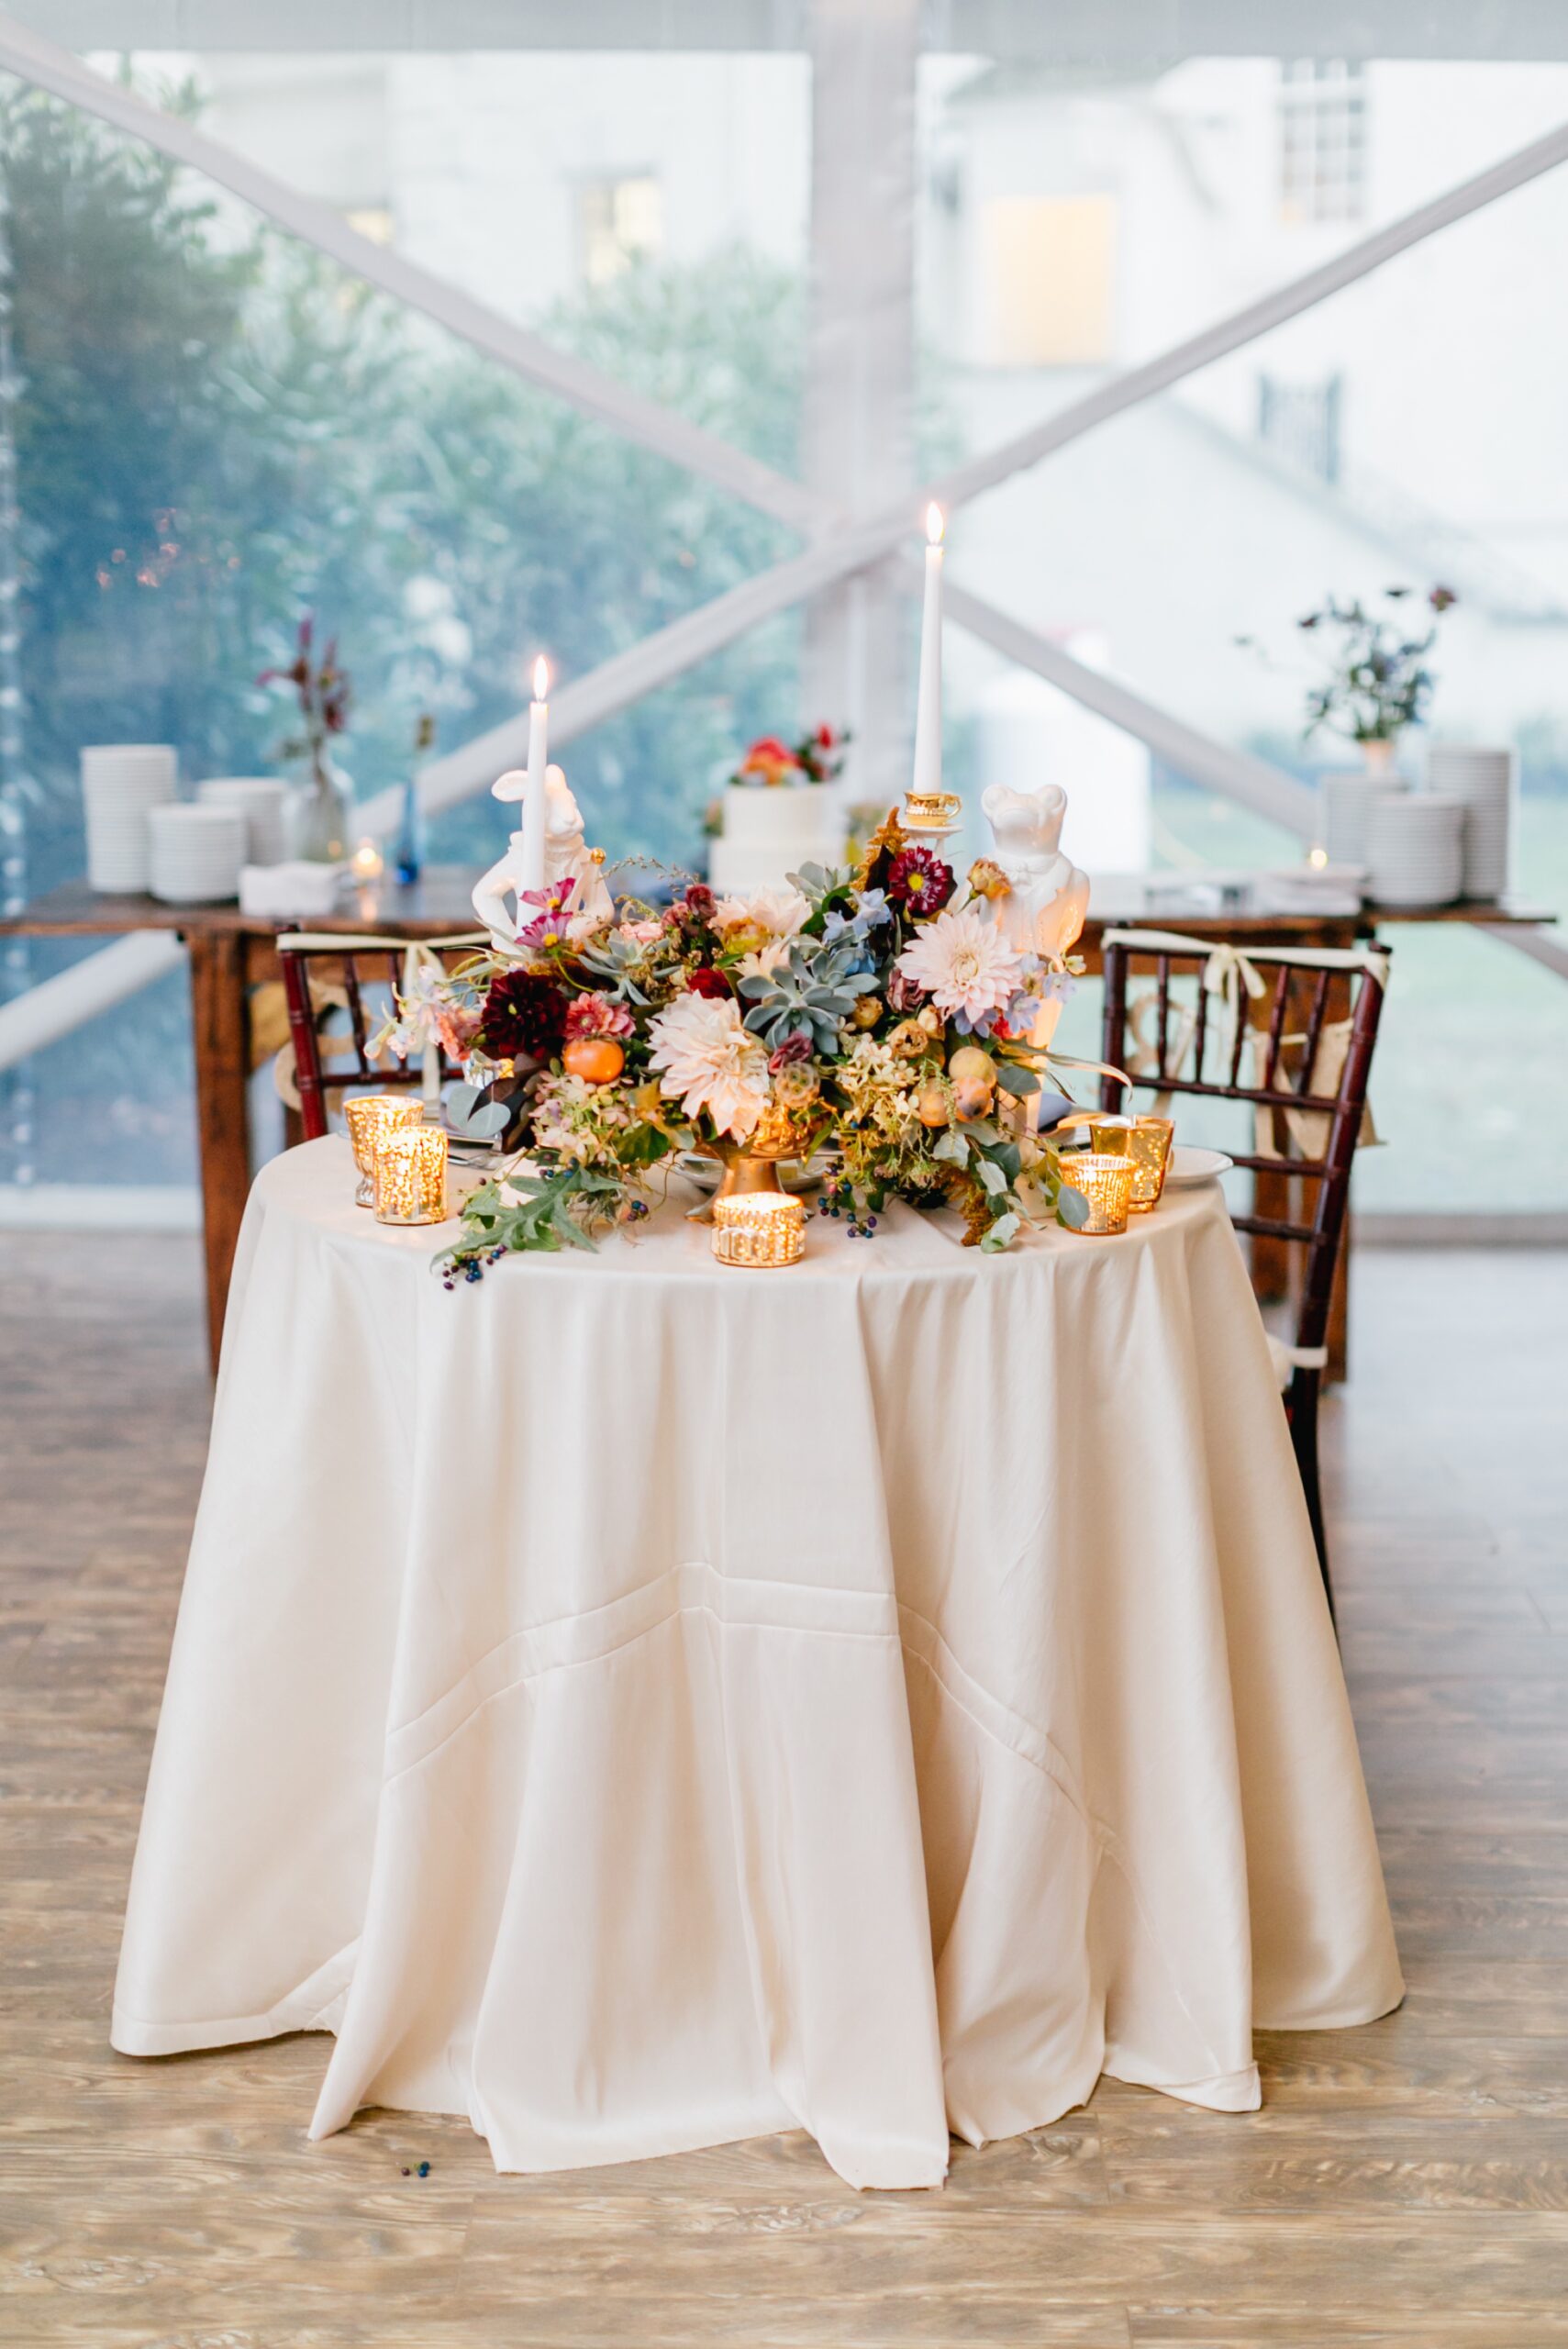 Whimsical sweetheart table at an estate wedding reception